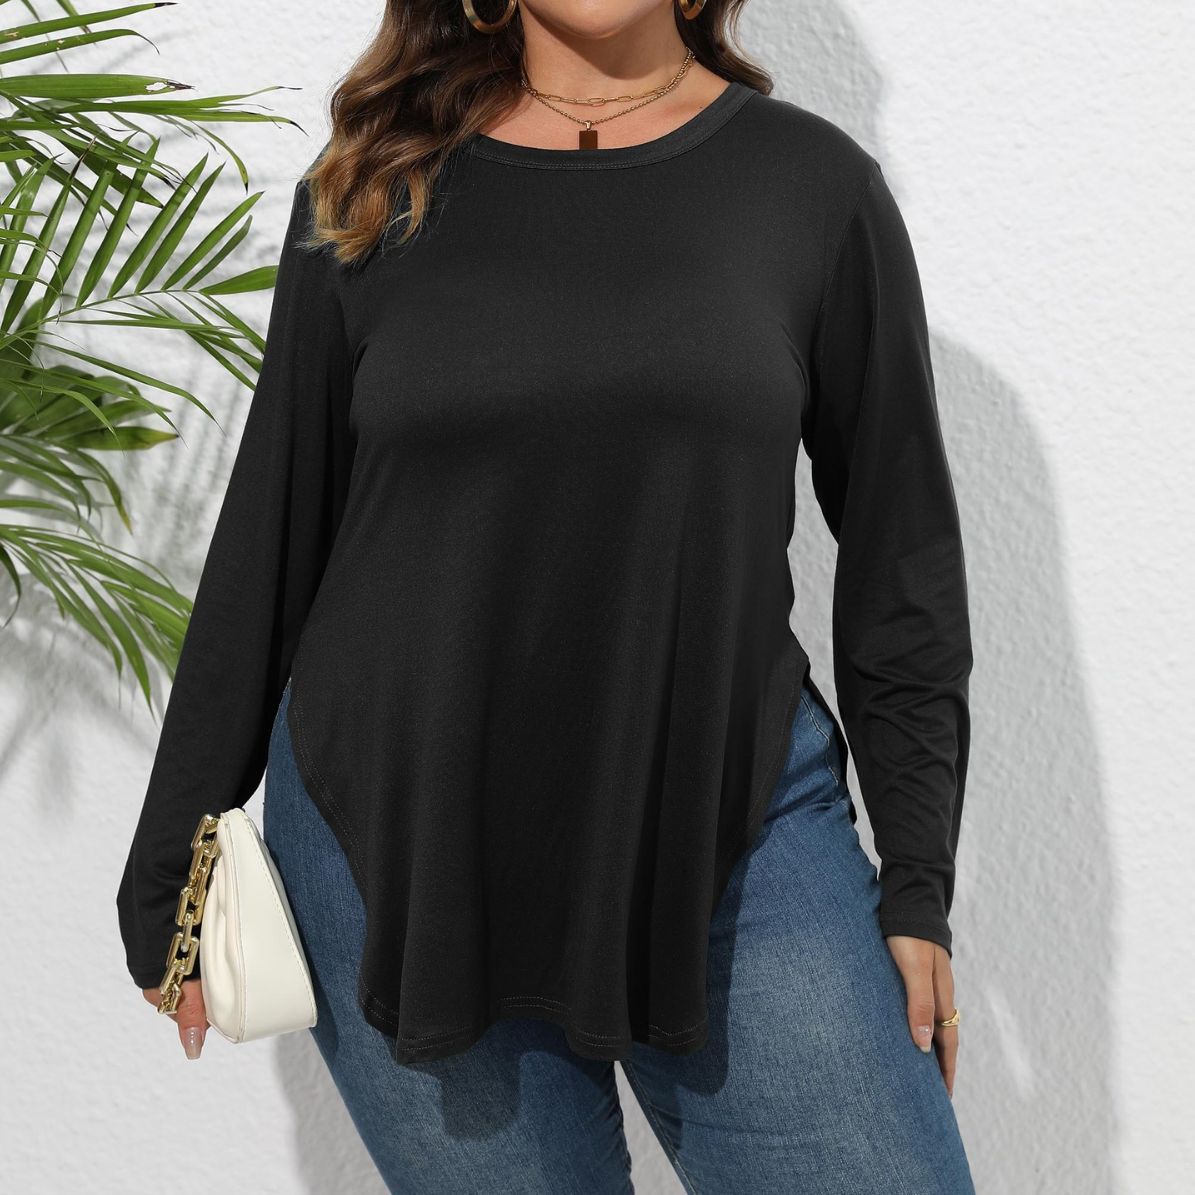 Women Autumn Winter Long Sleeved plus Size Women Clothes Solid Color Casual Irregular Asymmetric T shirt Bottoming Shirt